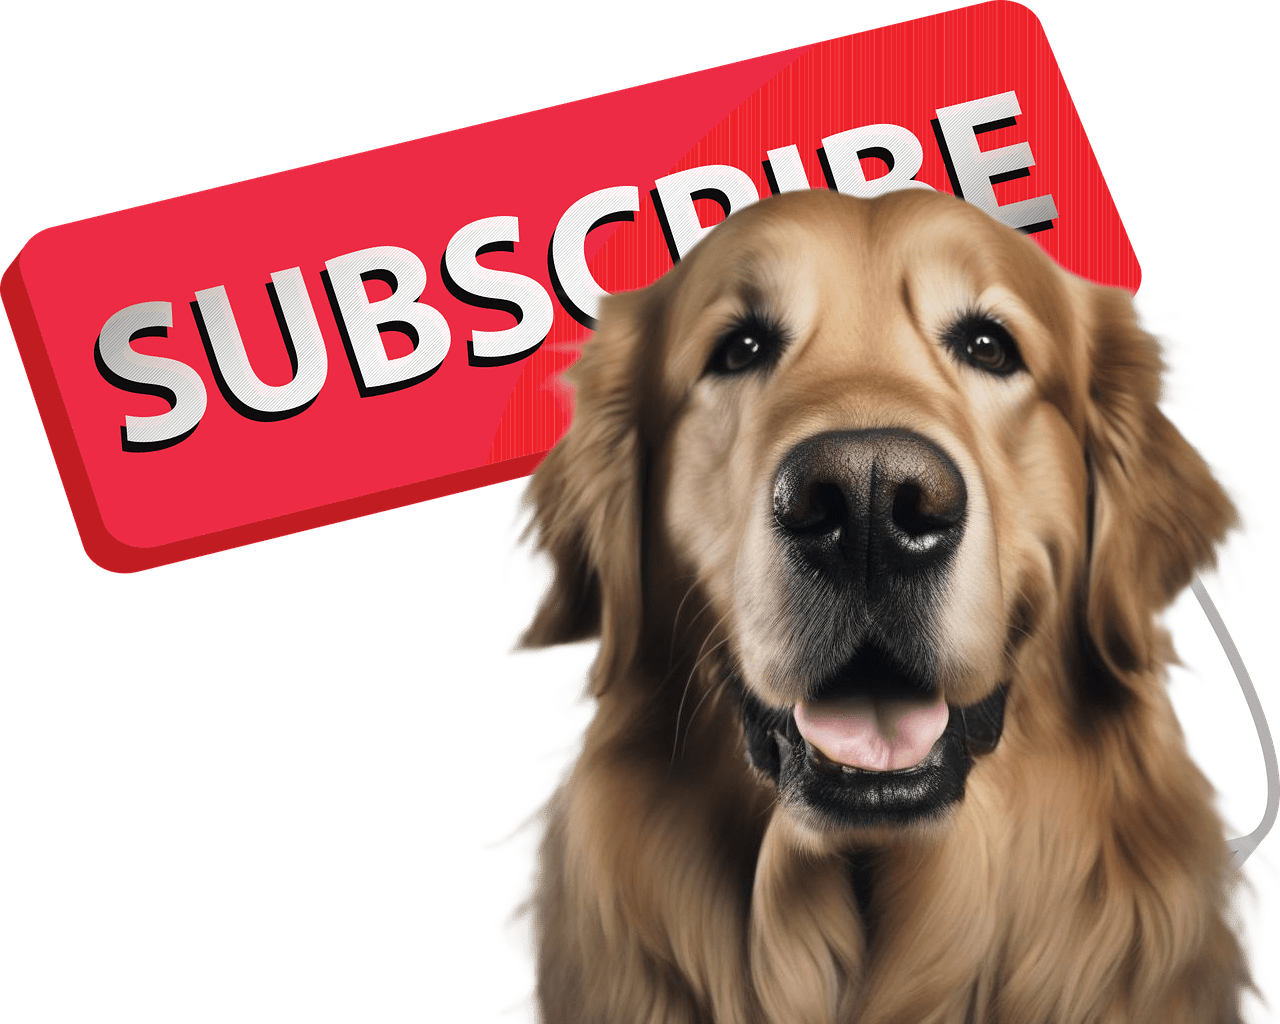 A dog with its head in front of the word subscribe.